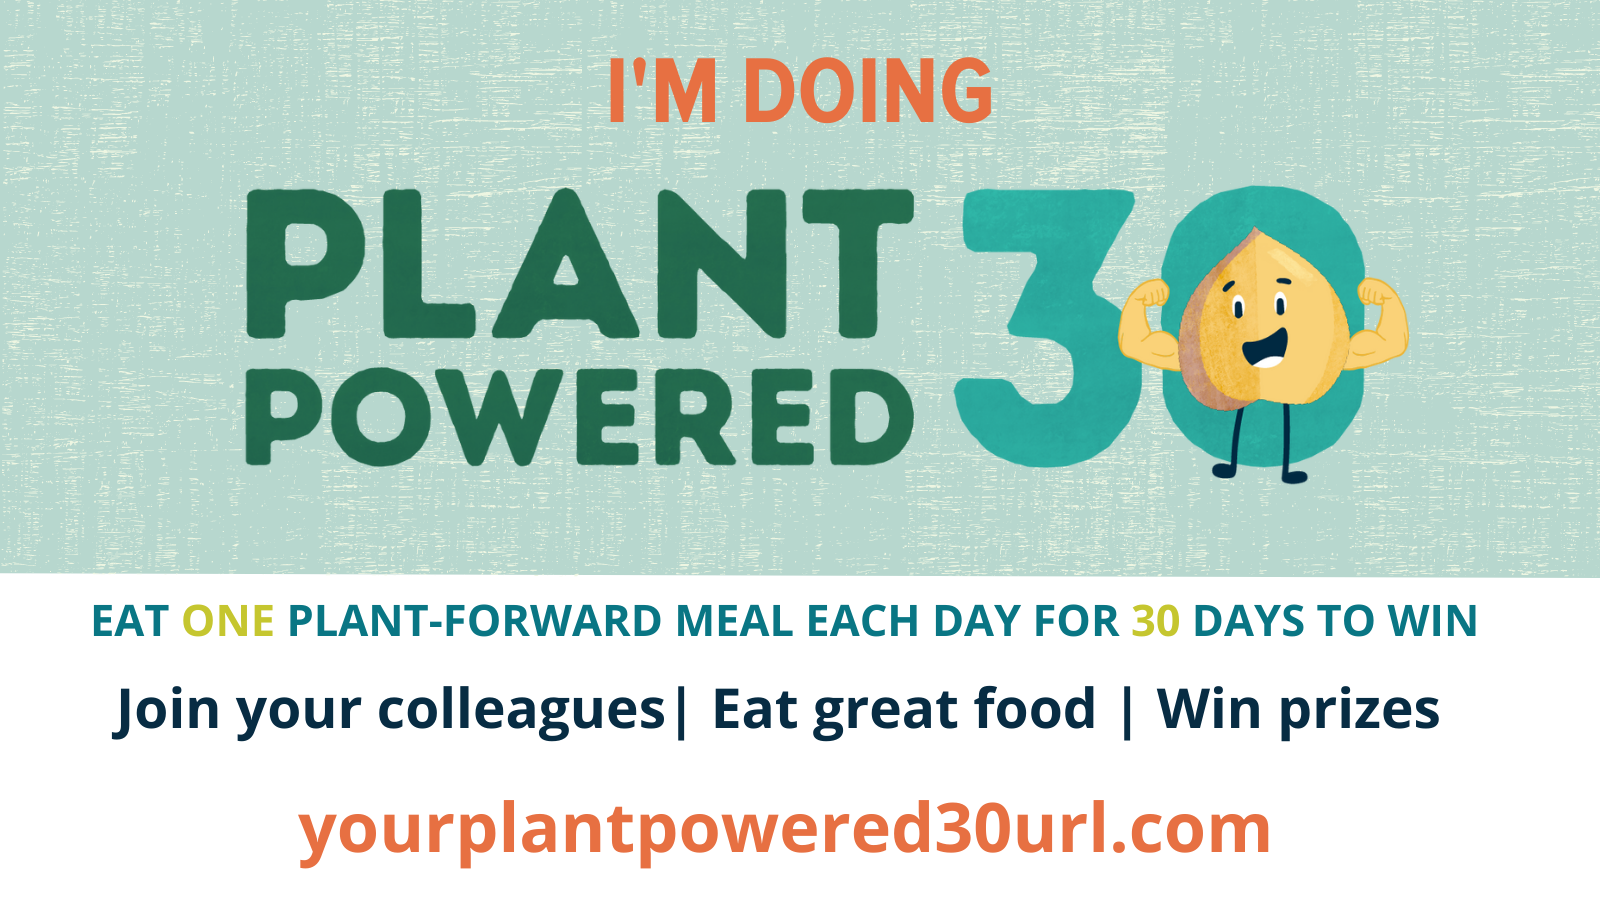 Plant Powered 30 Twitter image 2